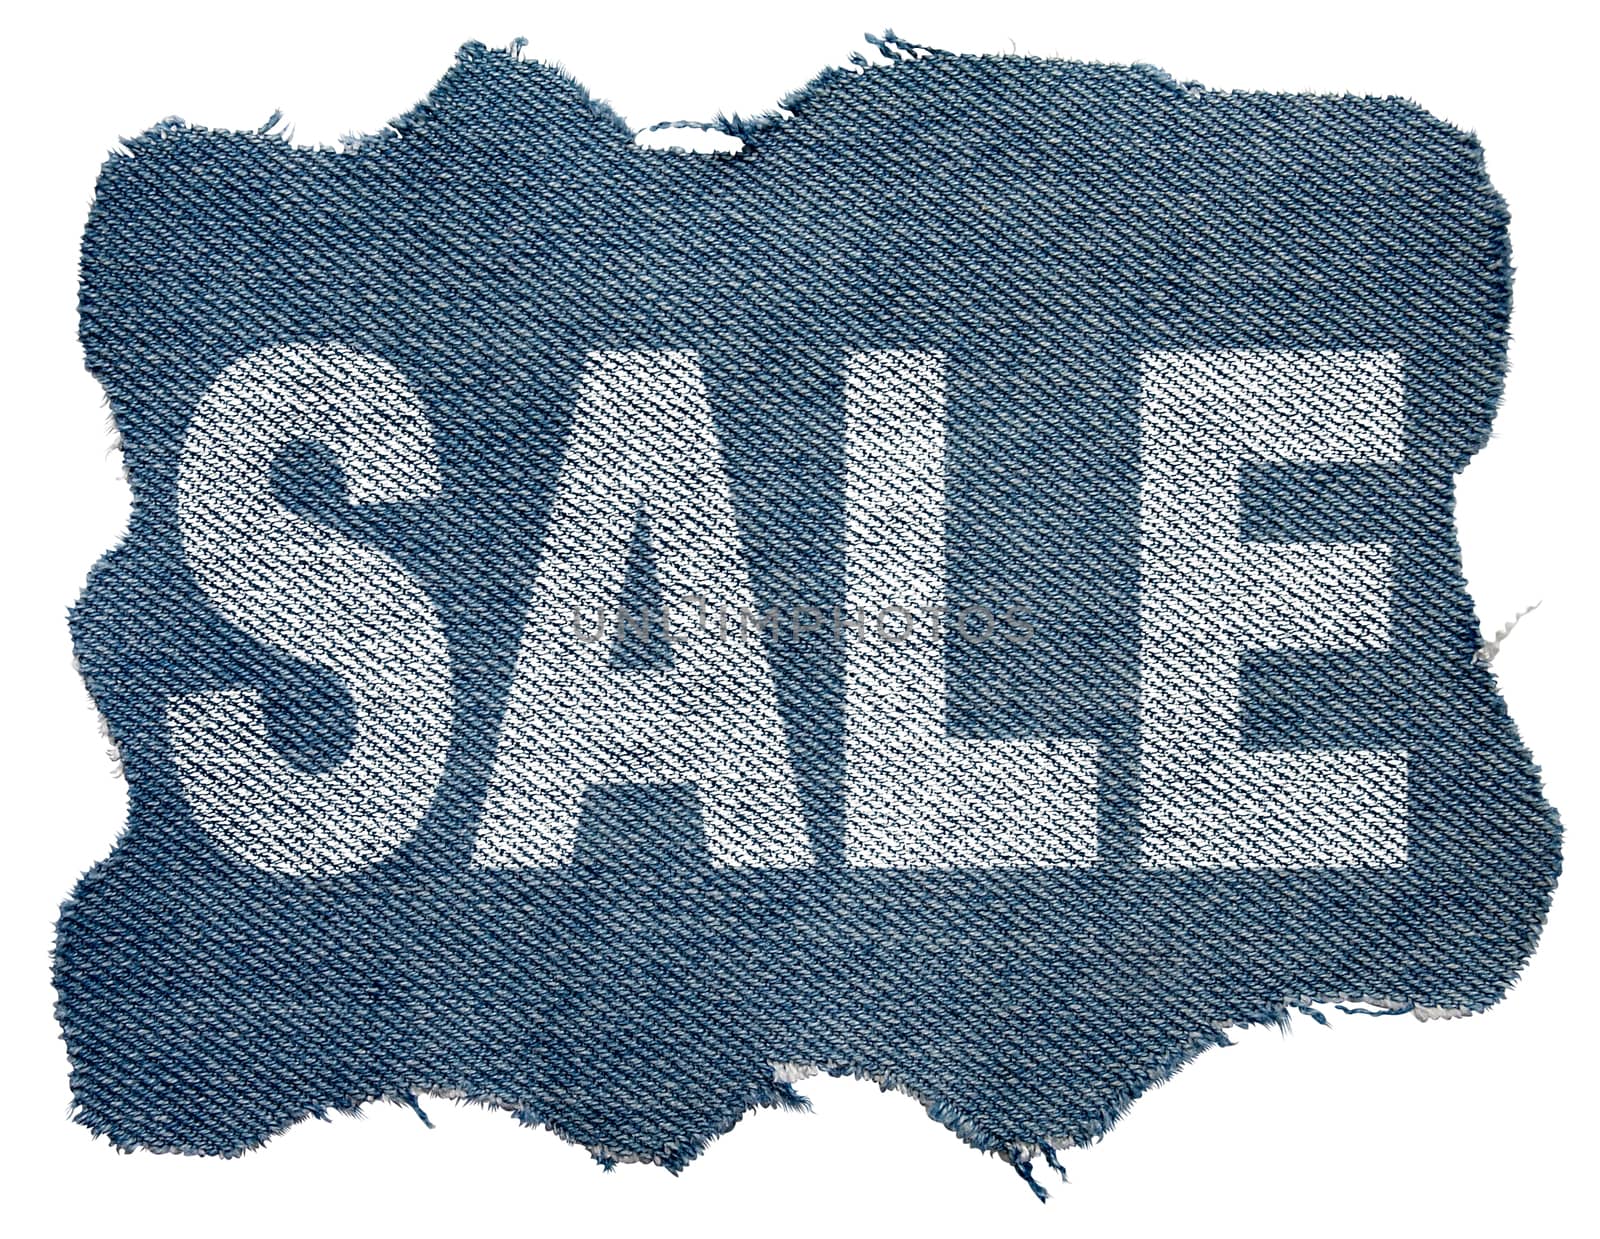 High resolution detail of denim jeans label with text SALE. Clipping path.